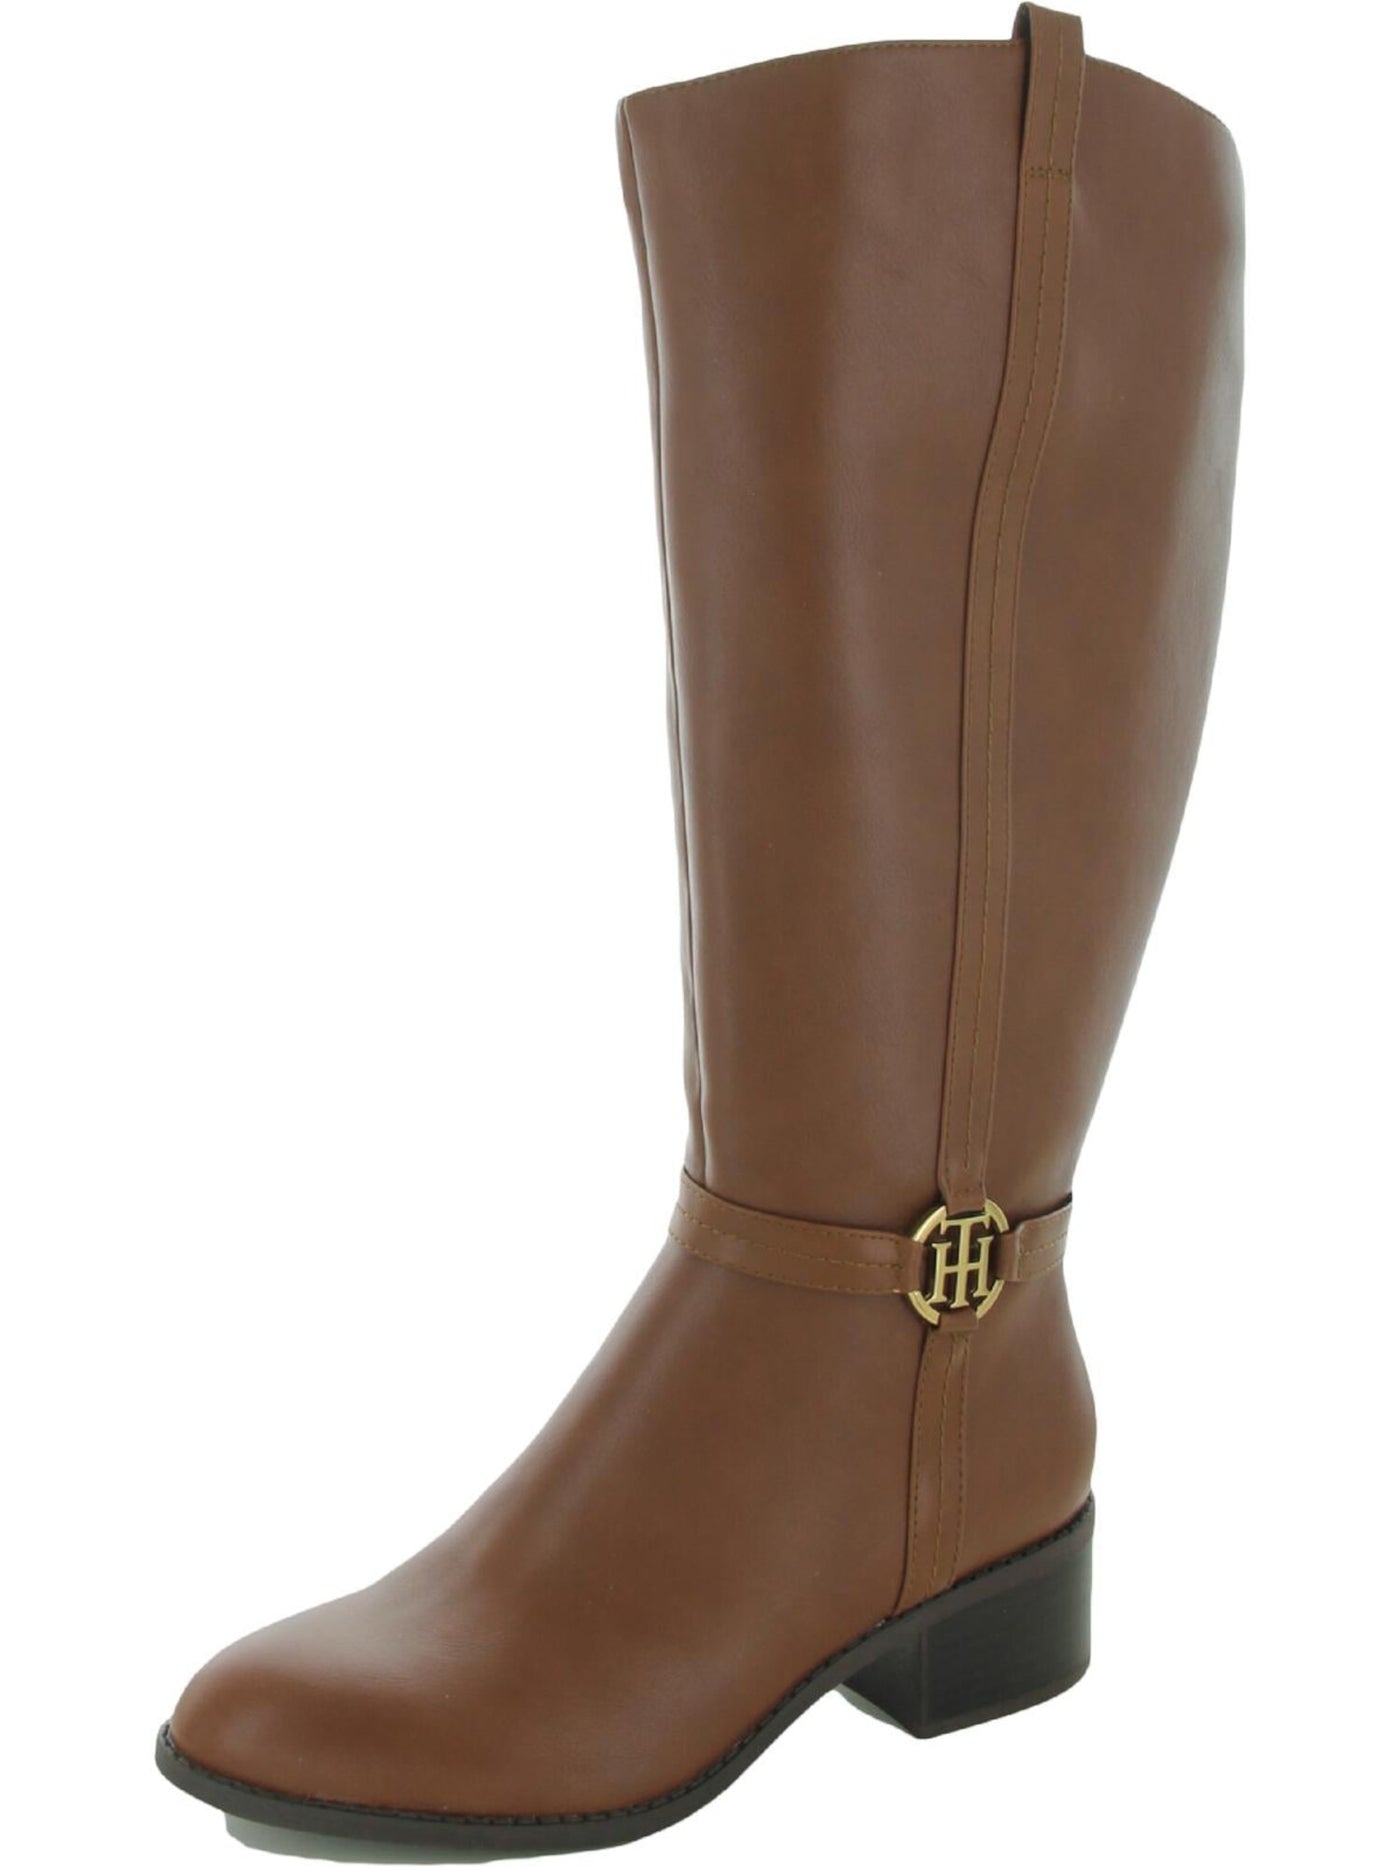 TOMMY HILFIGER Womens Brown Metallic Signature Ornament Stretch Gore Wide Calf Padded Diwan Almond Toe Block Heel Zip-Up Riding Boot 8 M WC